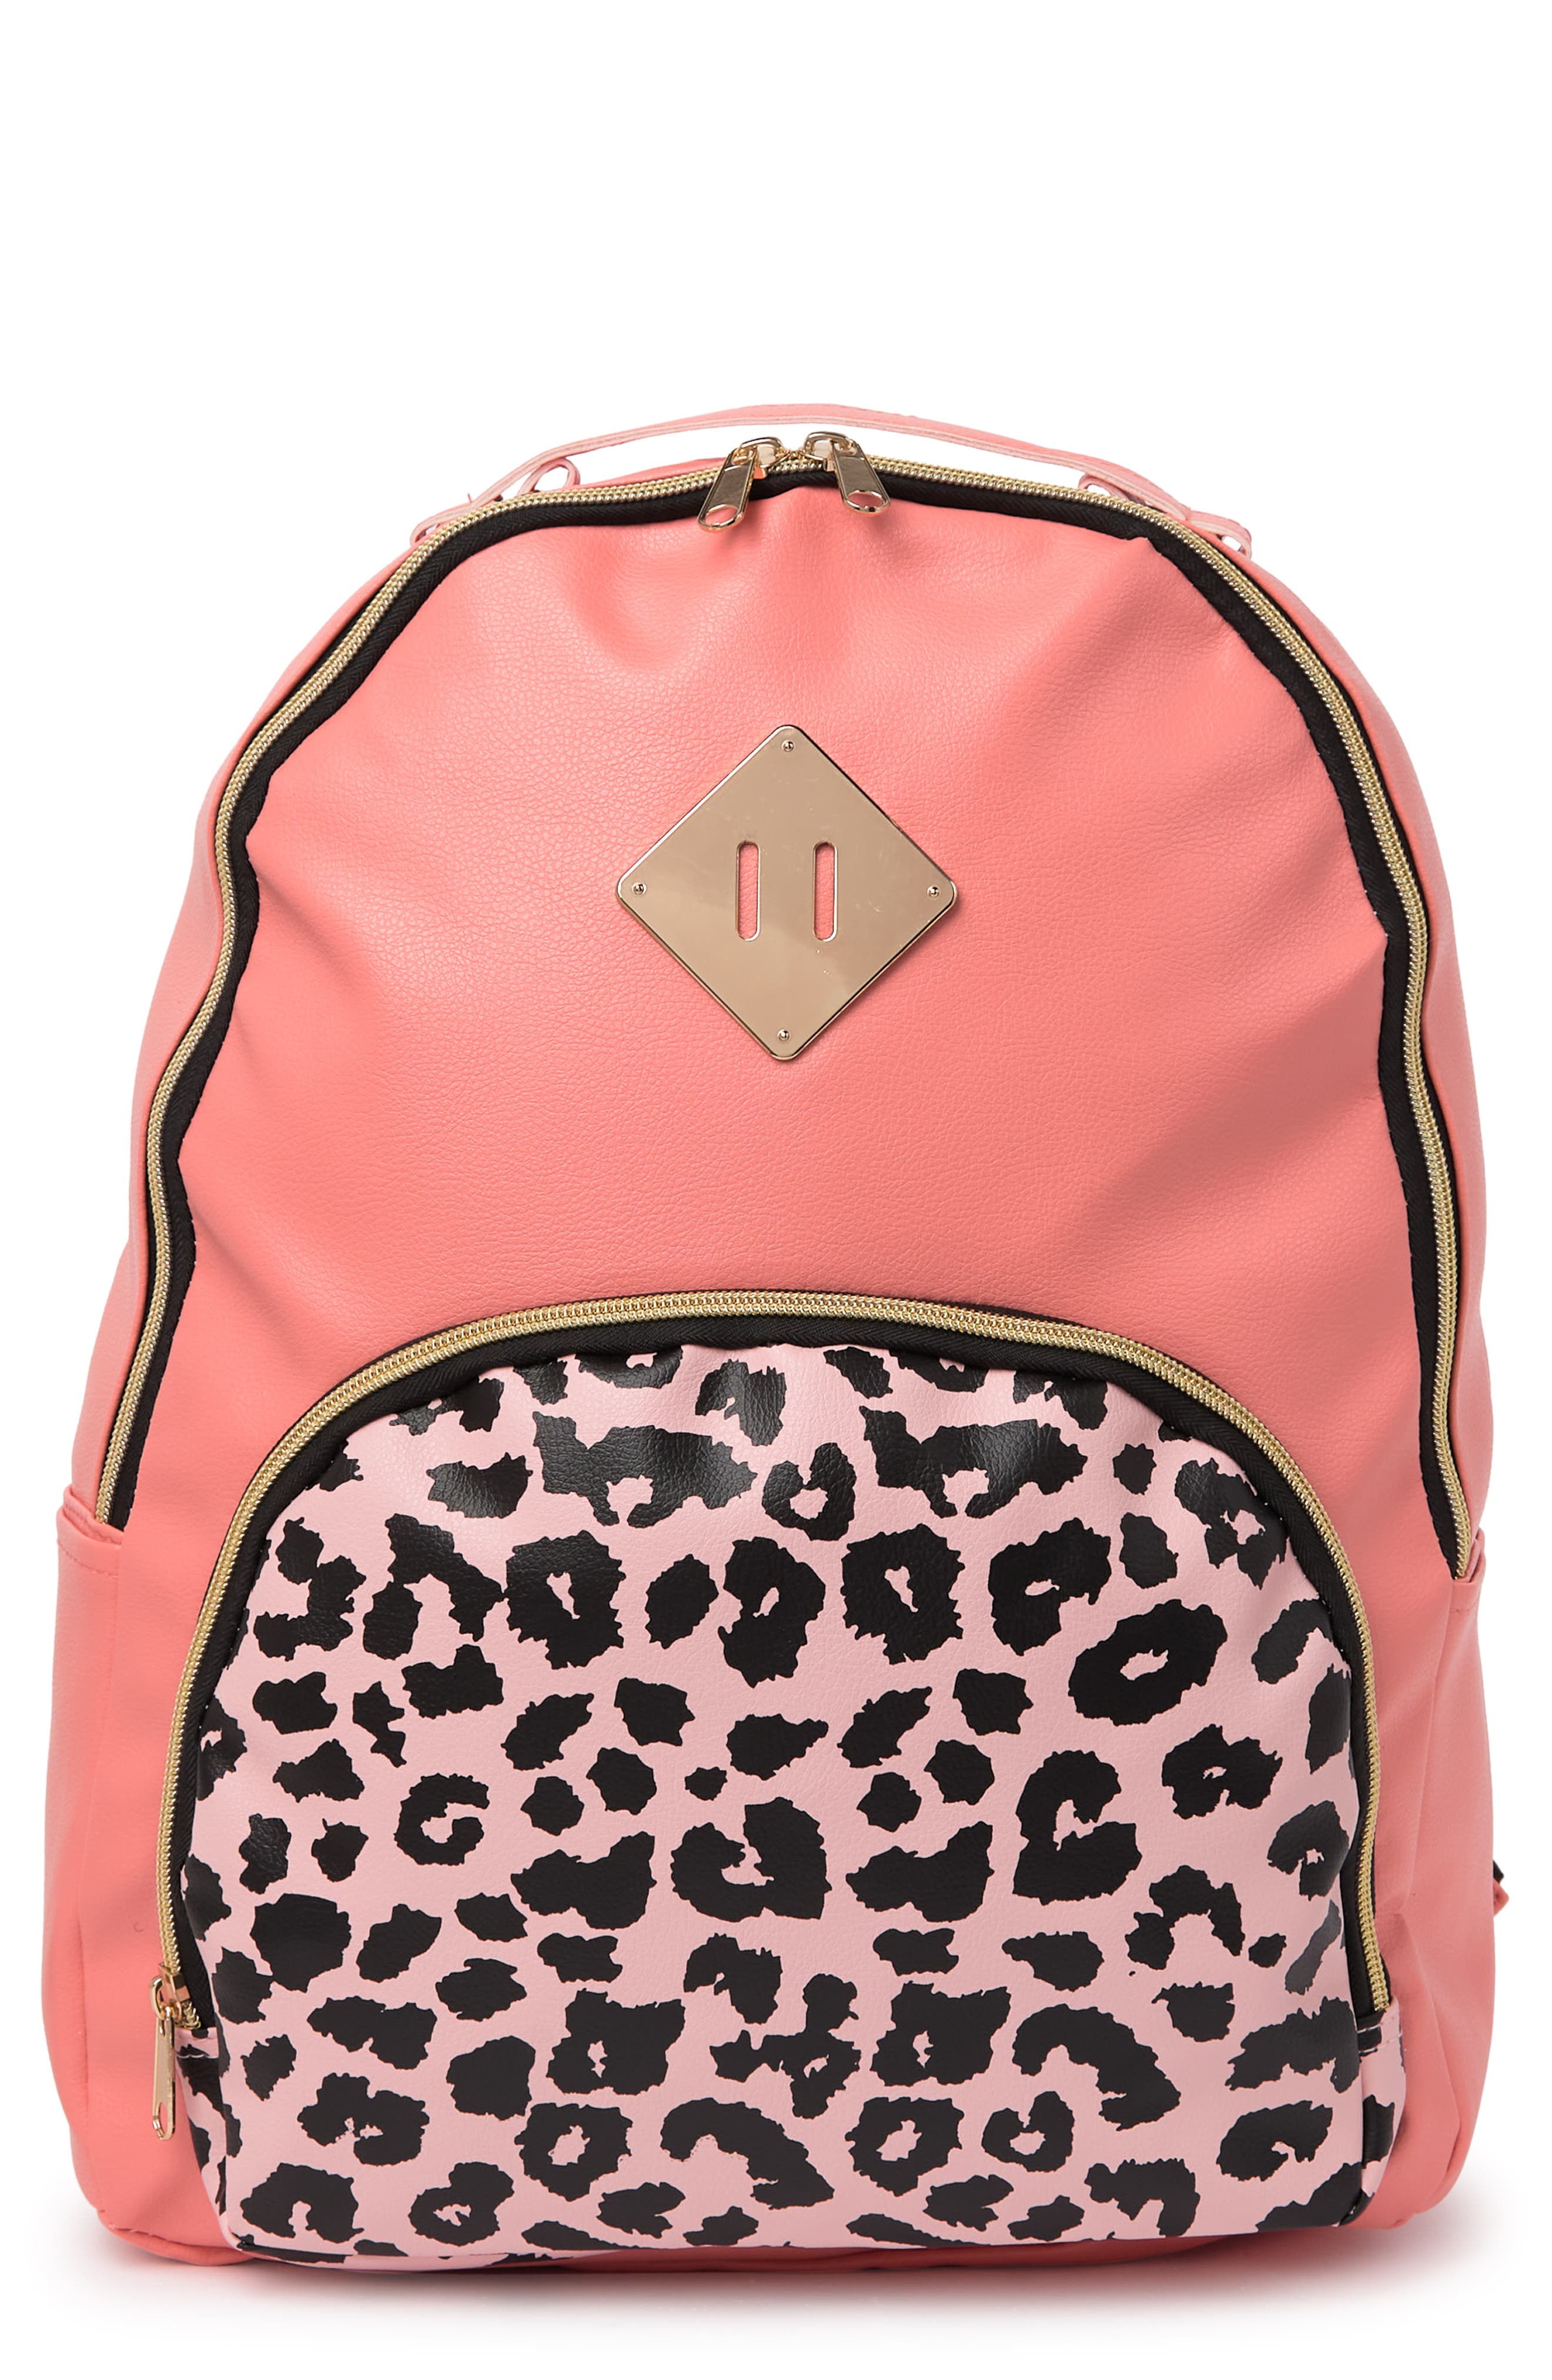 A D Sutton & Sons Kids' Vinyl Printed Backpack In Salmon